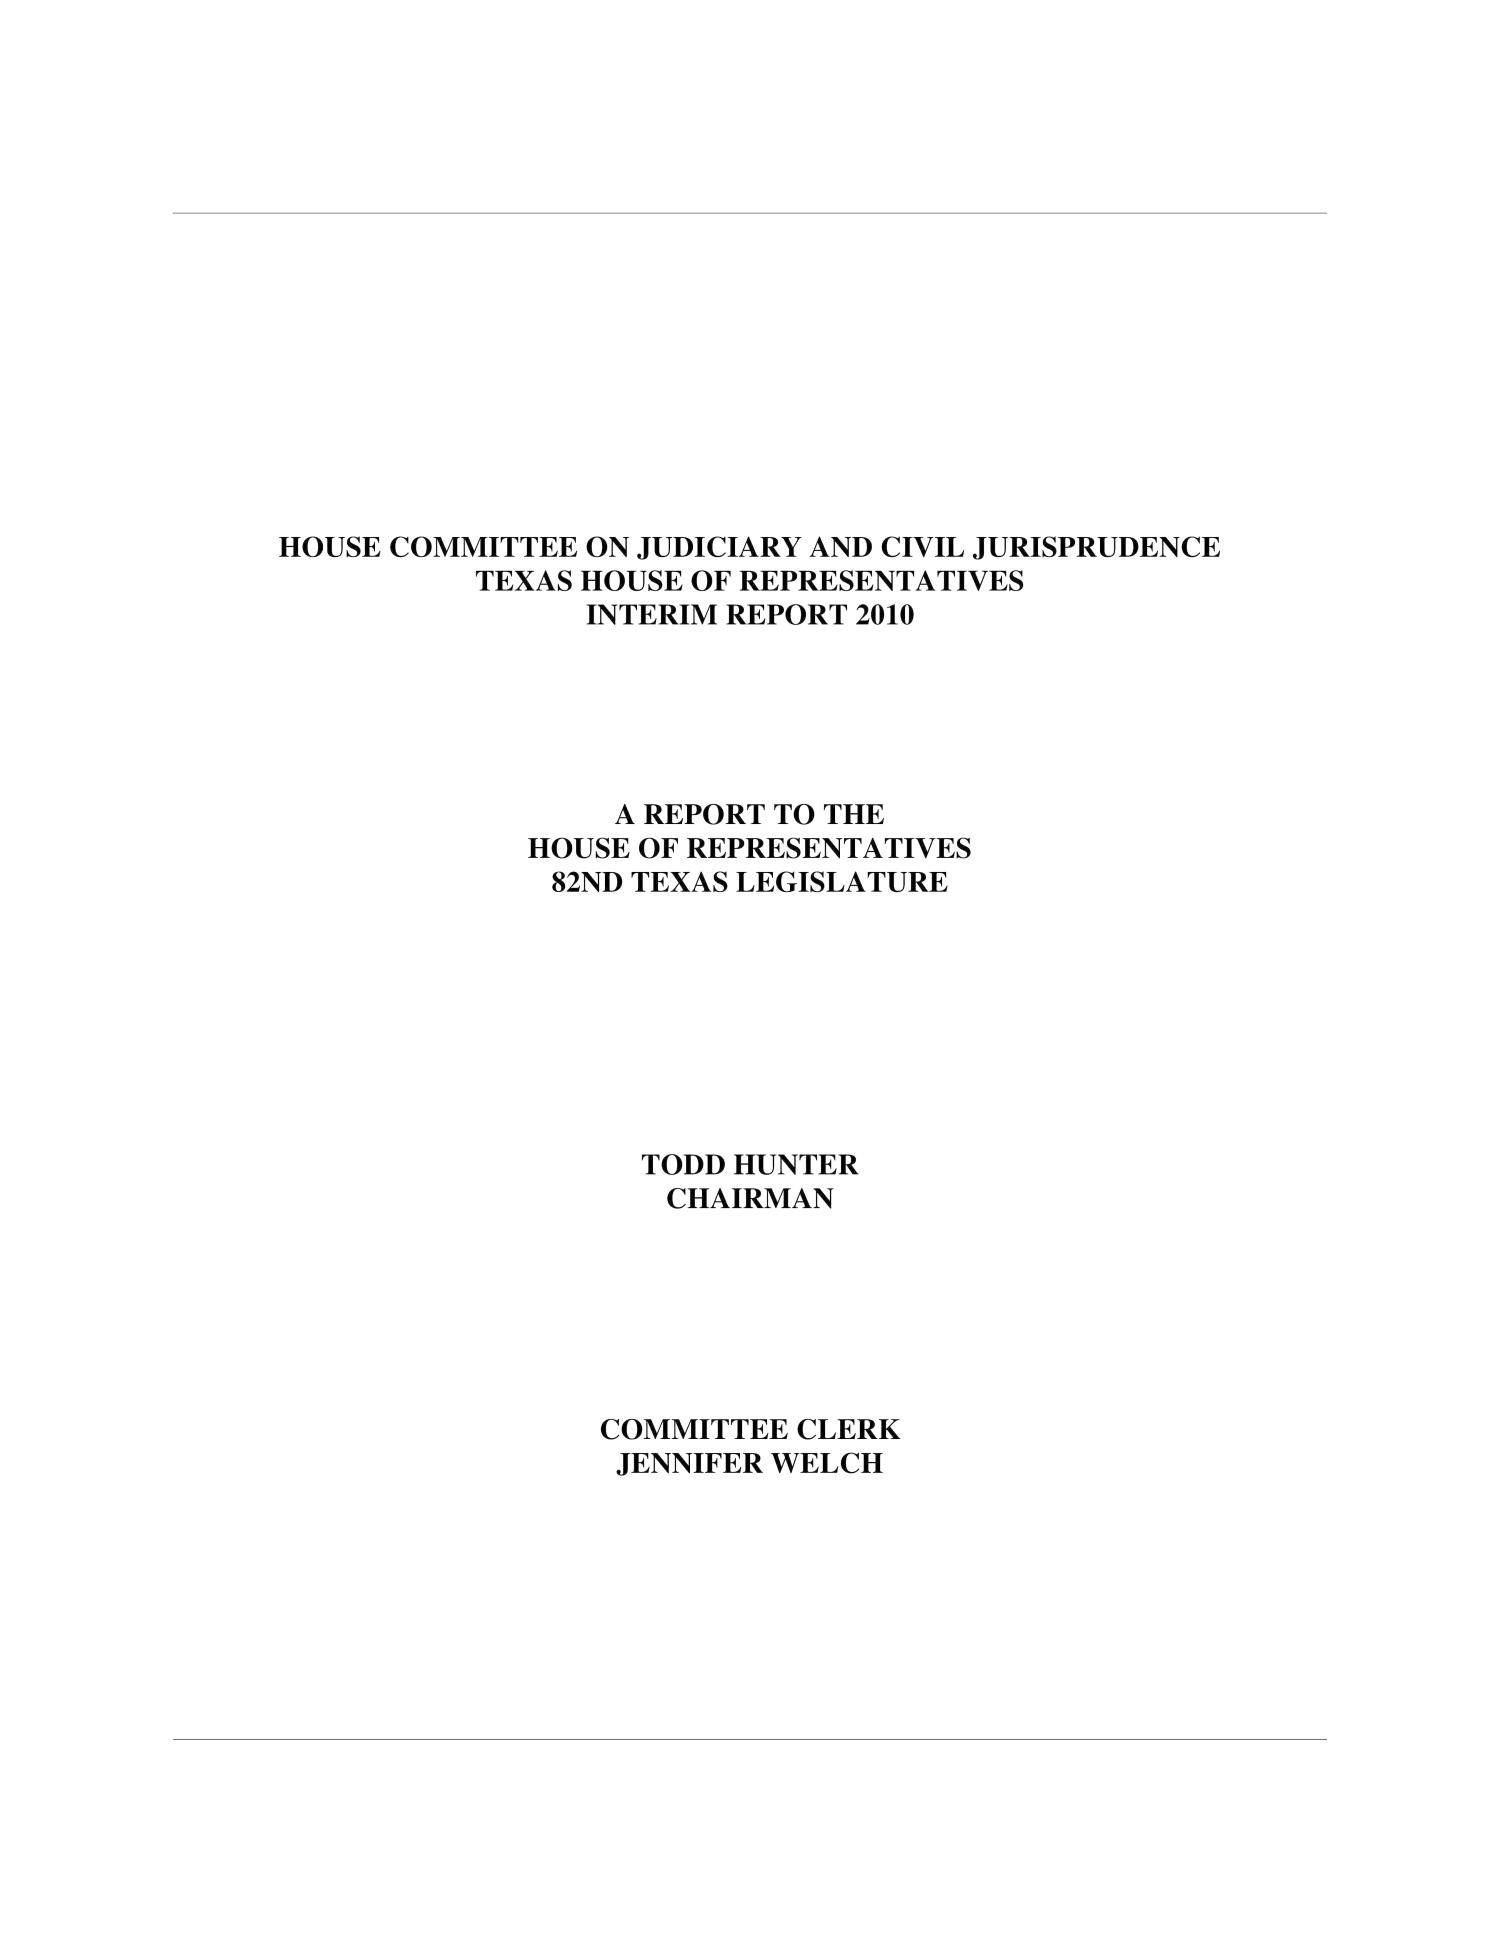 Interim Report to the 82nd Texas Legislature: House Committee on Judiciary and Civil Jurisprudence
                                                
                                                    Title Page
                                                